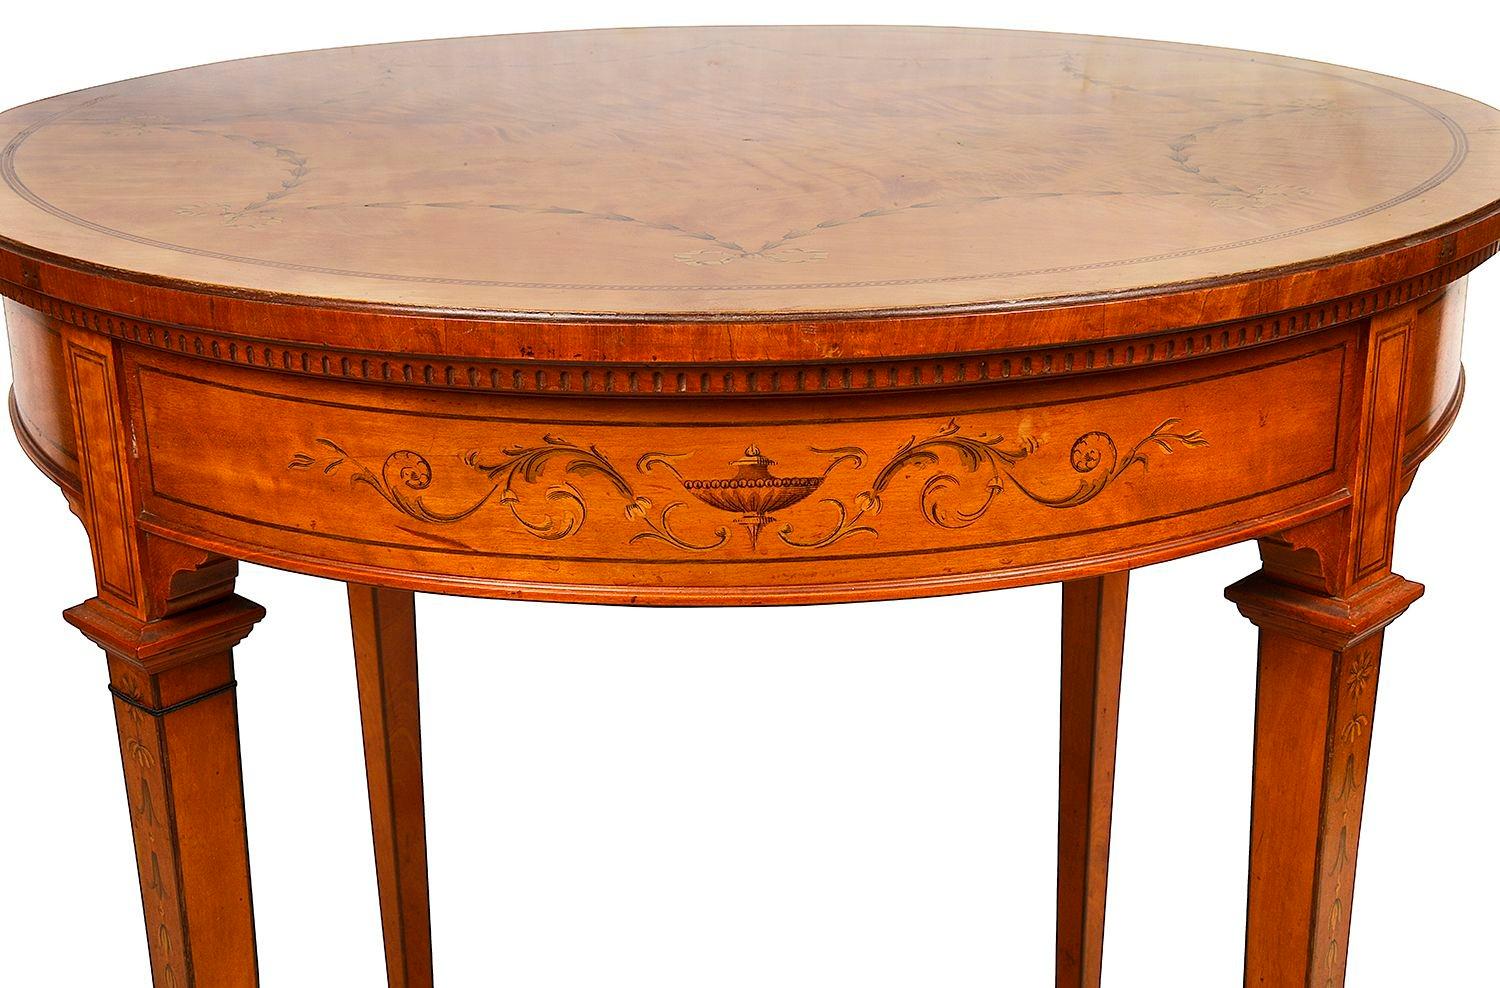 English Sheraton Revival Satinwood Inlaid Side Table, 19th Century For Sale